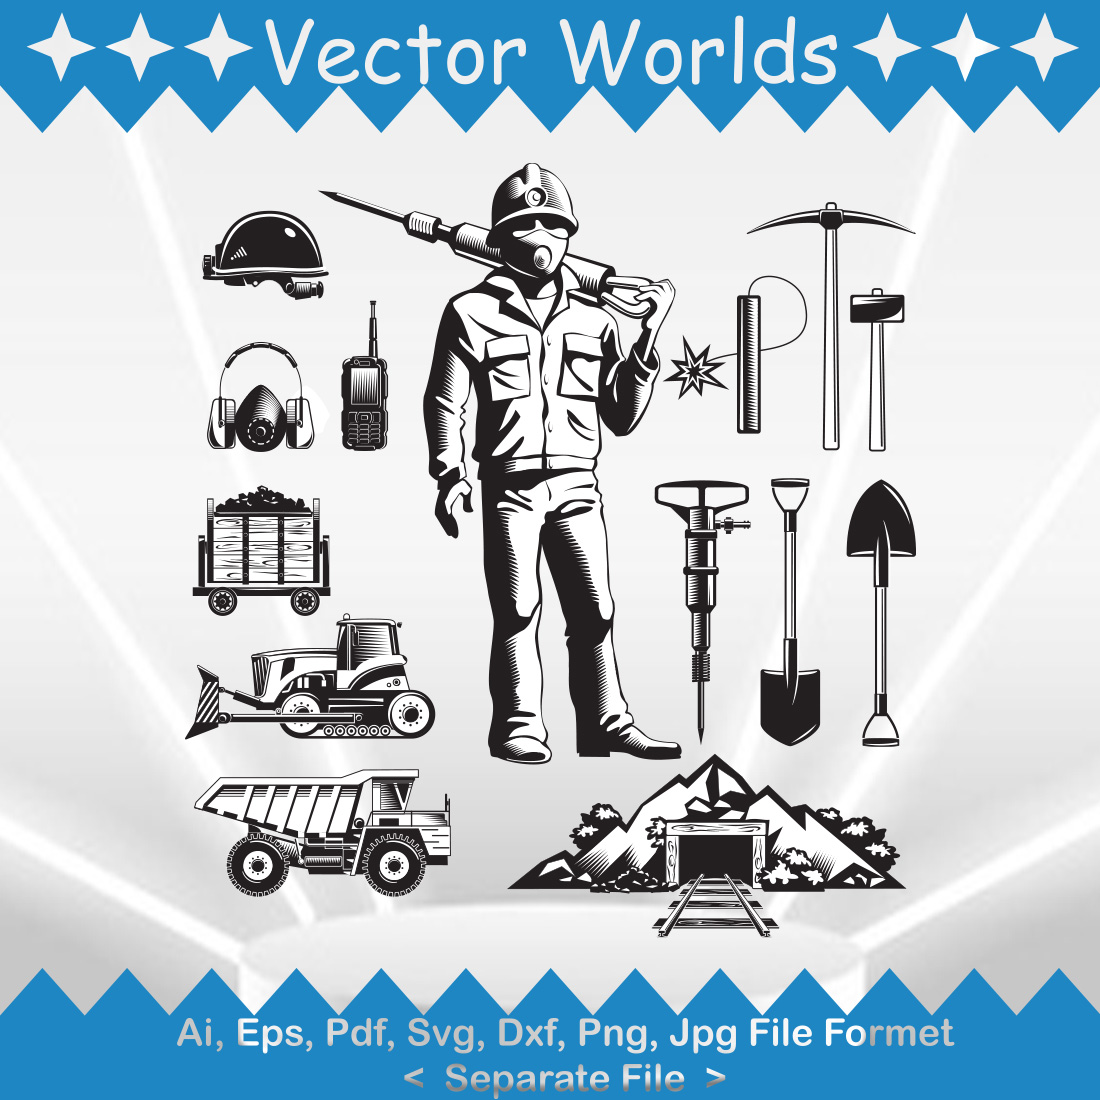 Mining Industry SVG Vector Design cover image.